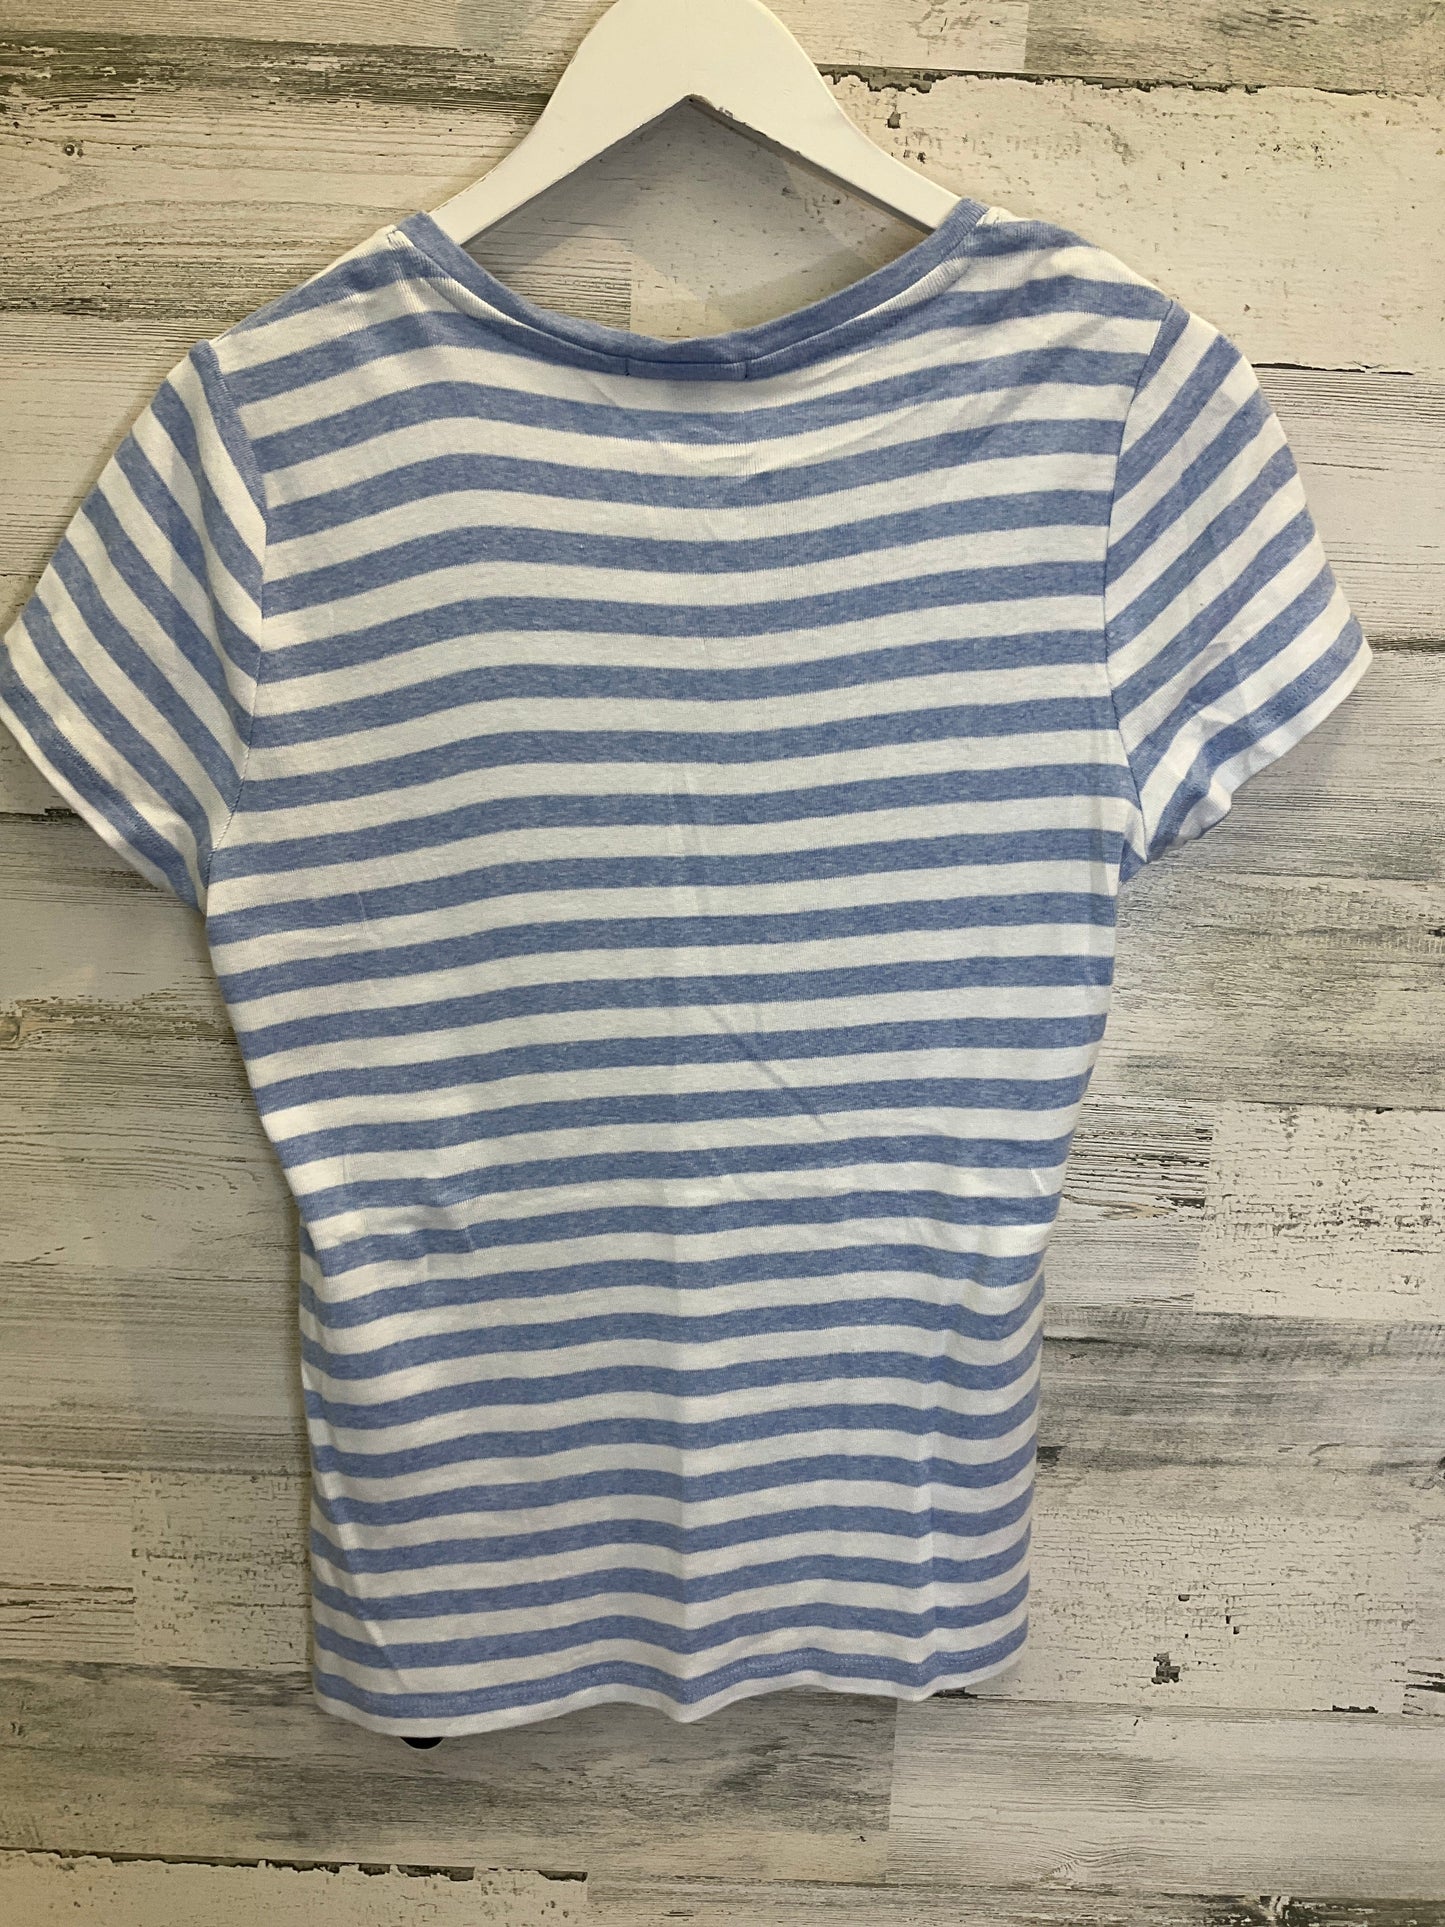 Blue & White Top Short Sleeve Tommy Hilfiger, Size M